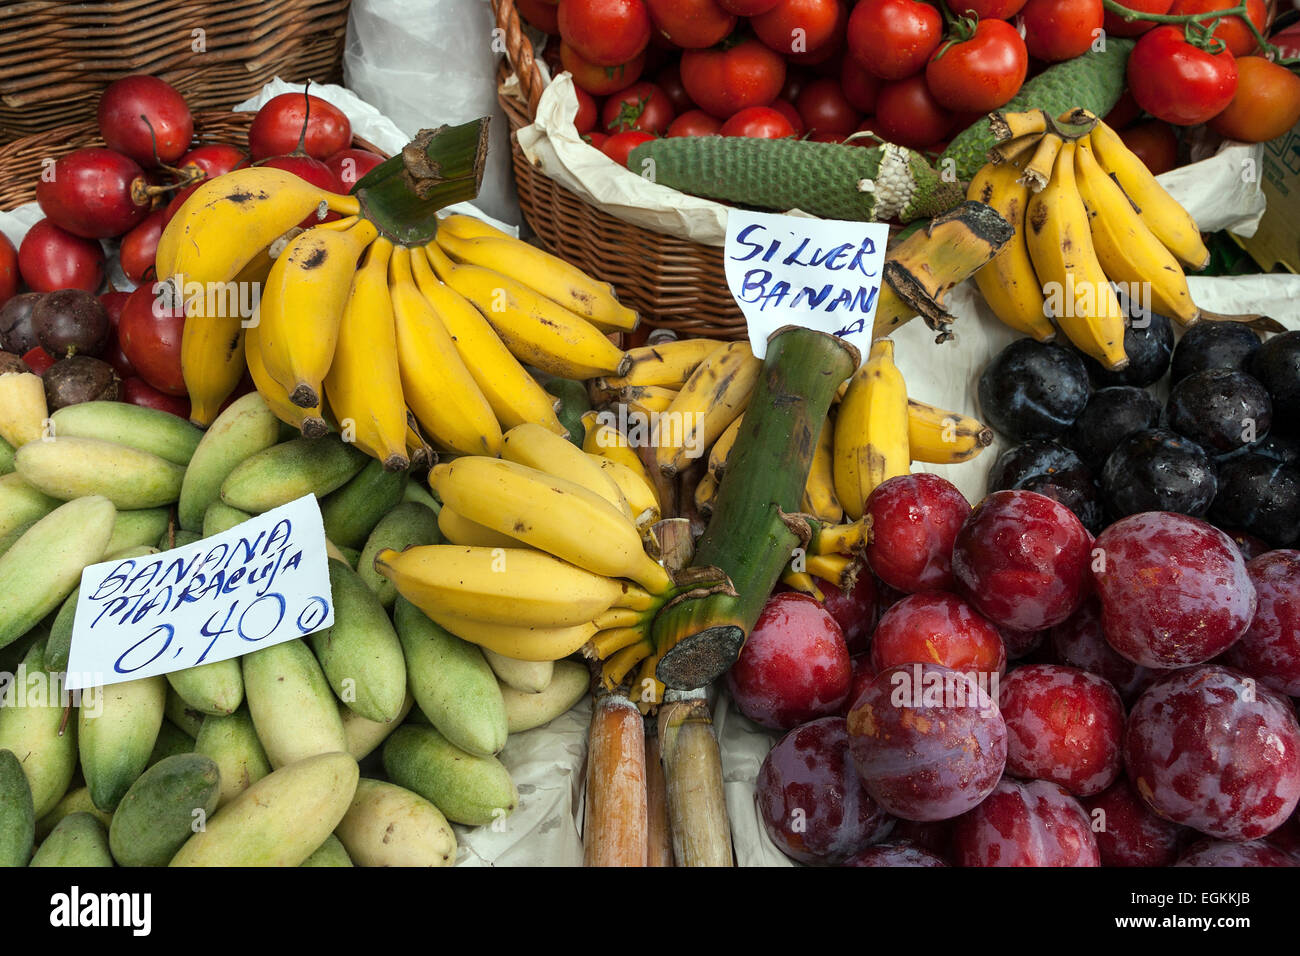 Fruits and vegetables, Market Hall, Funchal, Madeira, Portugal Stock Photo